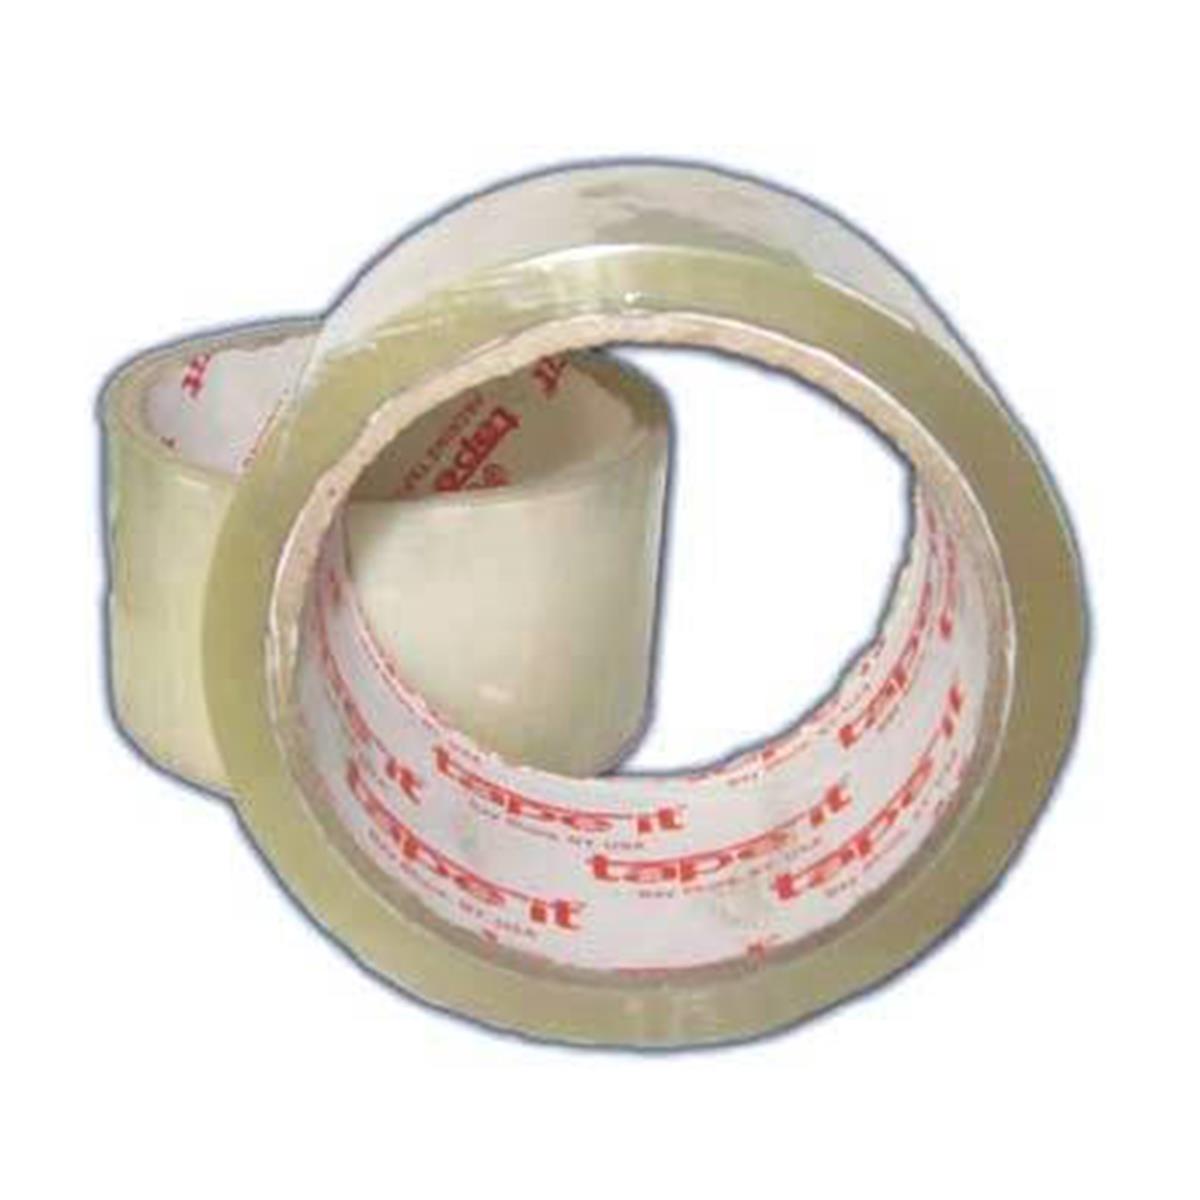 Uc225c Pec Clear 2 In. 55 Yard Packing Tape - Case Of 36